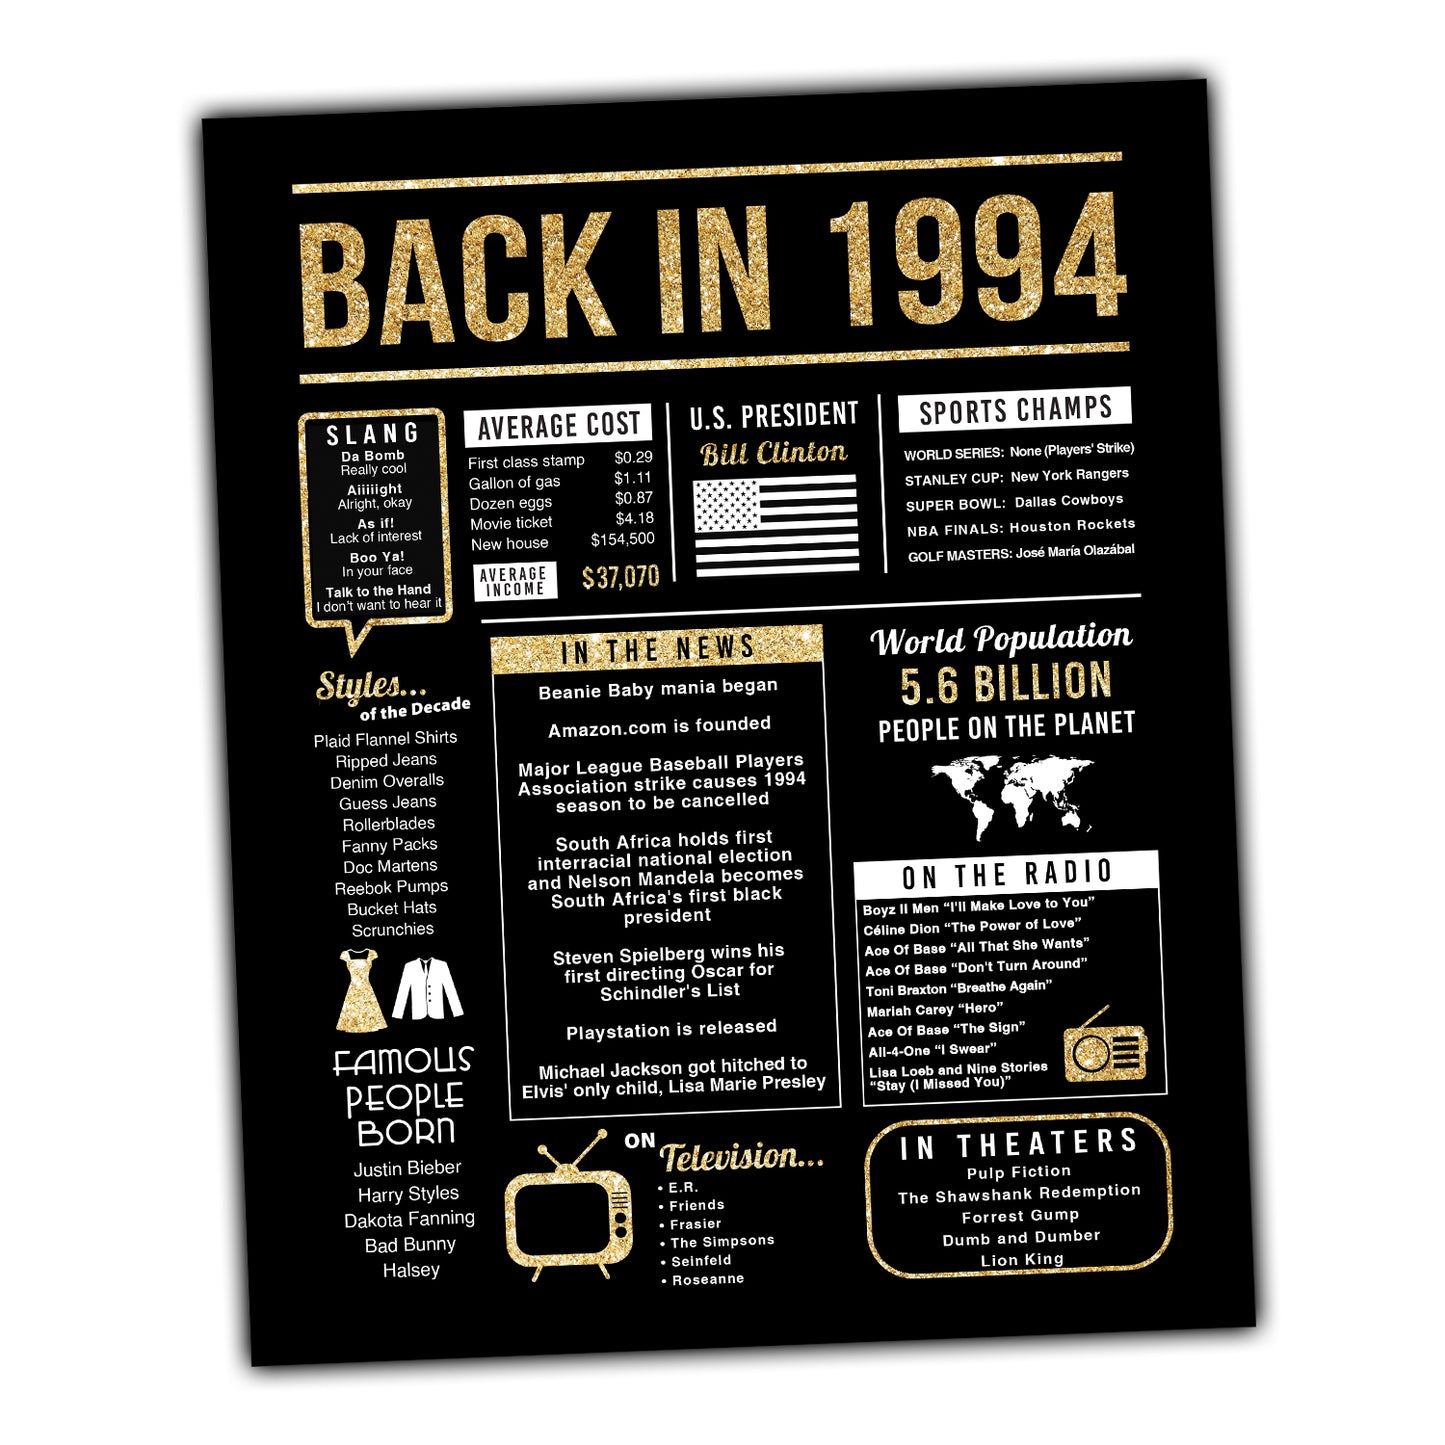 30th Birthday Centerpiece Sign (8x10") Black & Gold Back-in 1994 (Unframed)